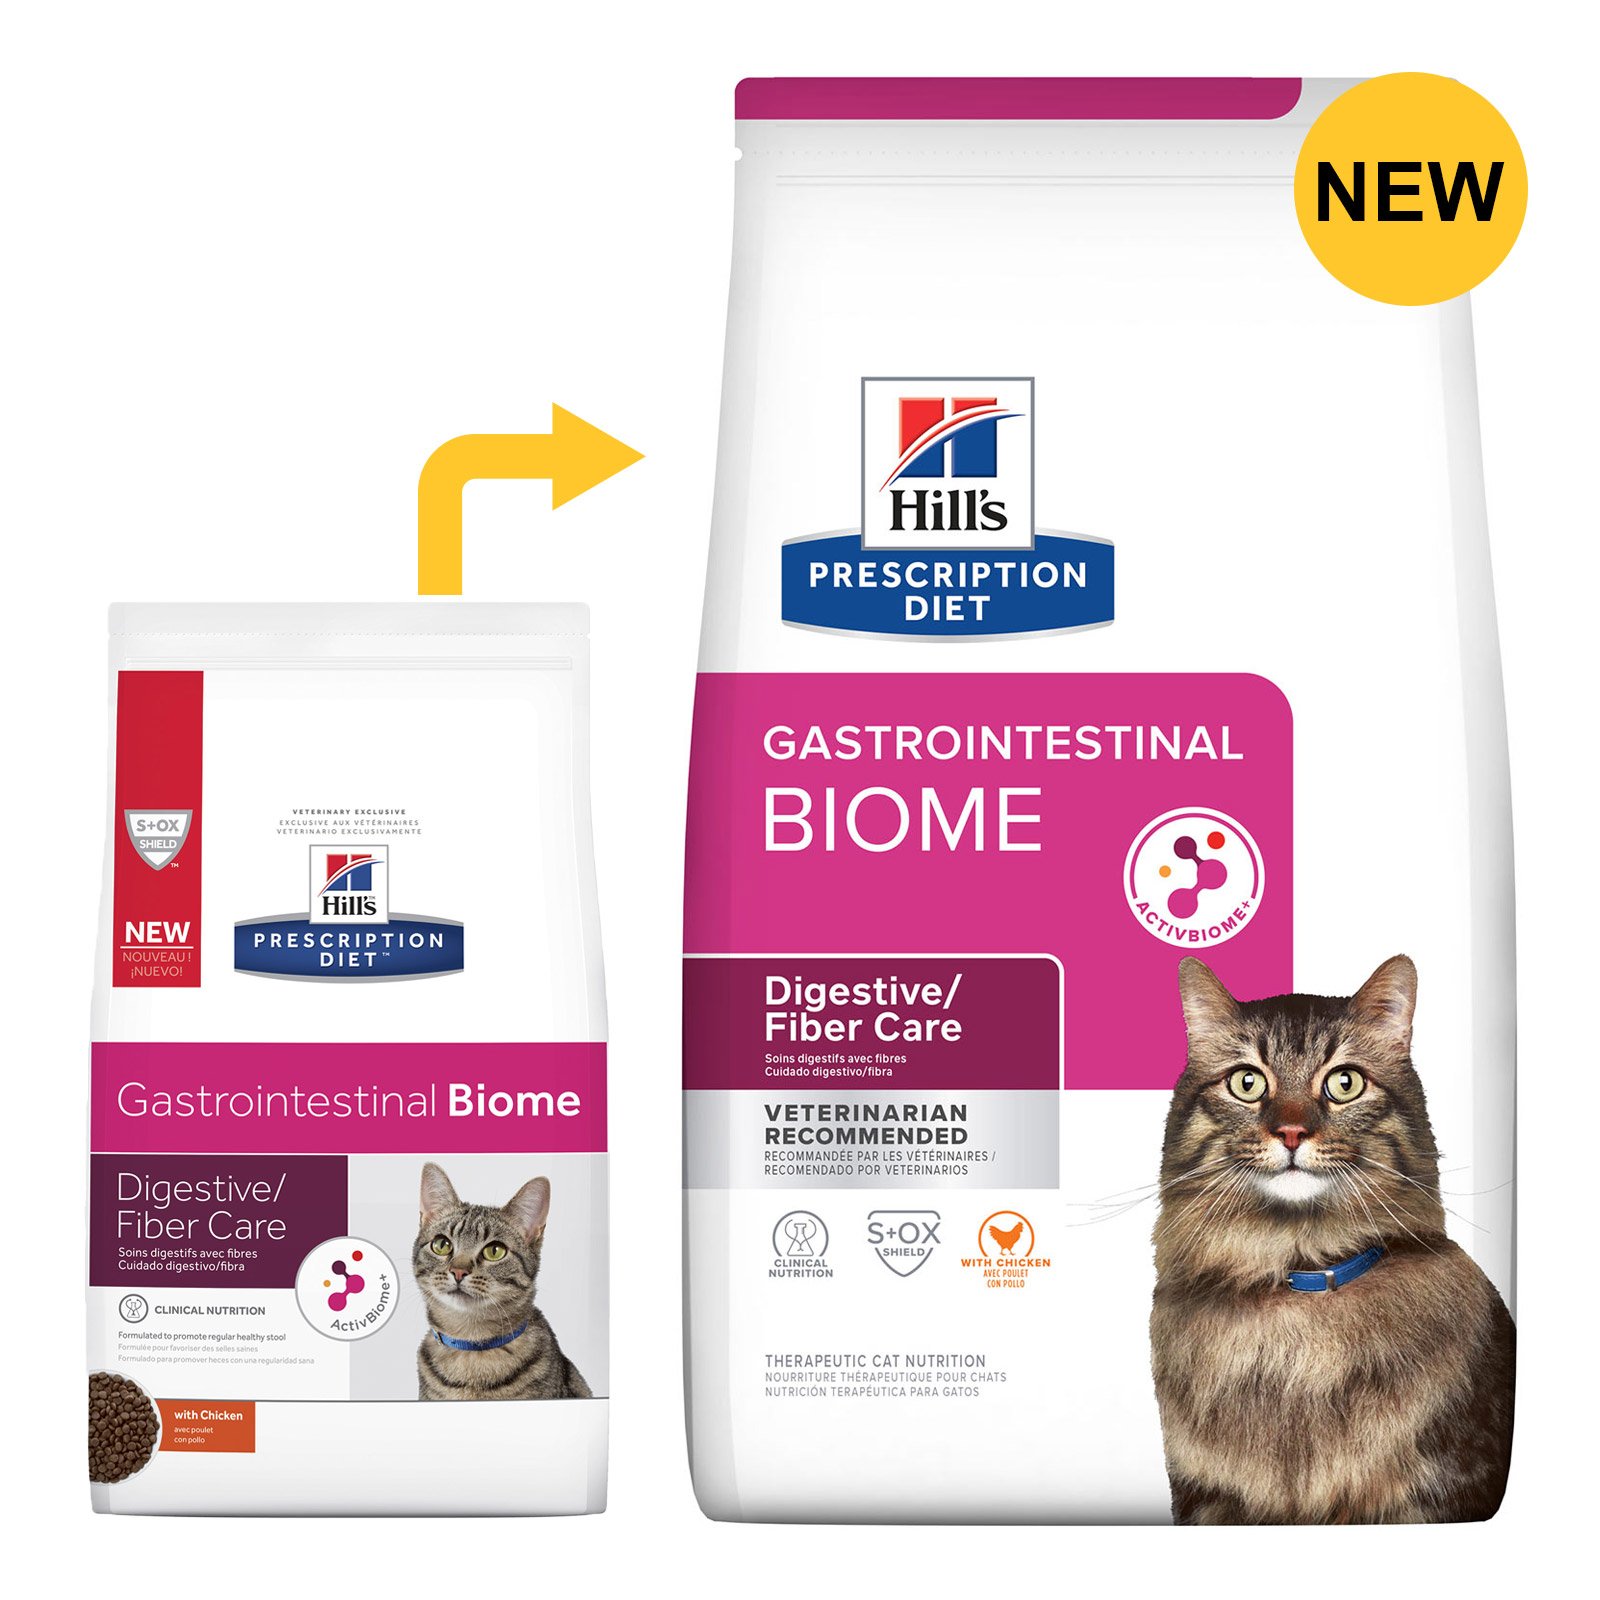 Hill's Prescription Diet Gastrointestinal Biome Digestive Fibre Care with Chicken Dry Cat Food 